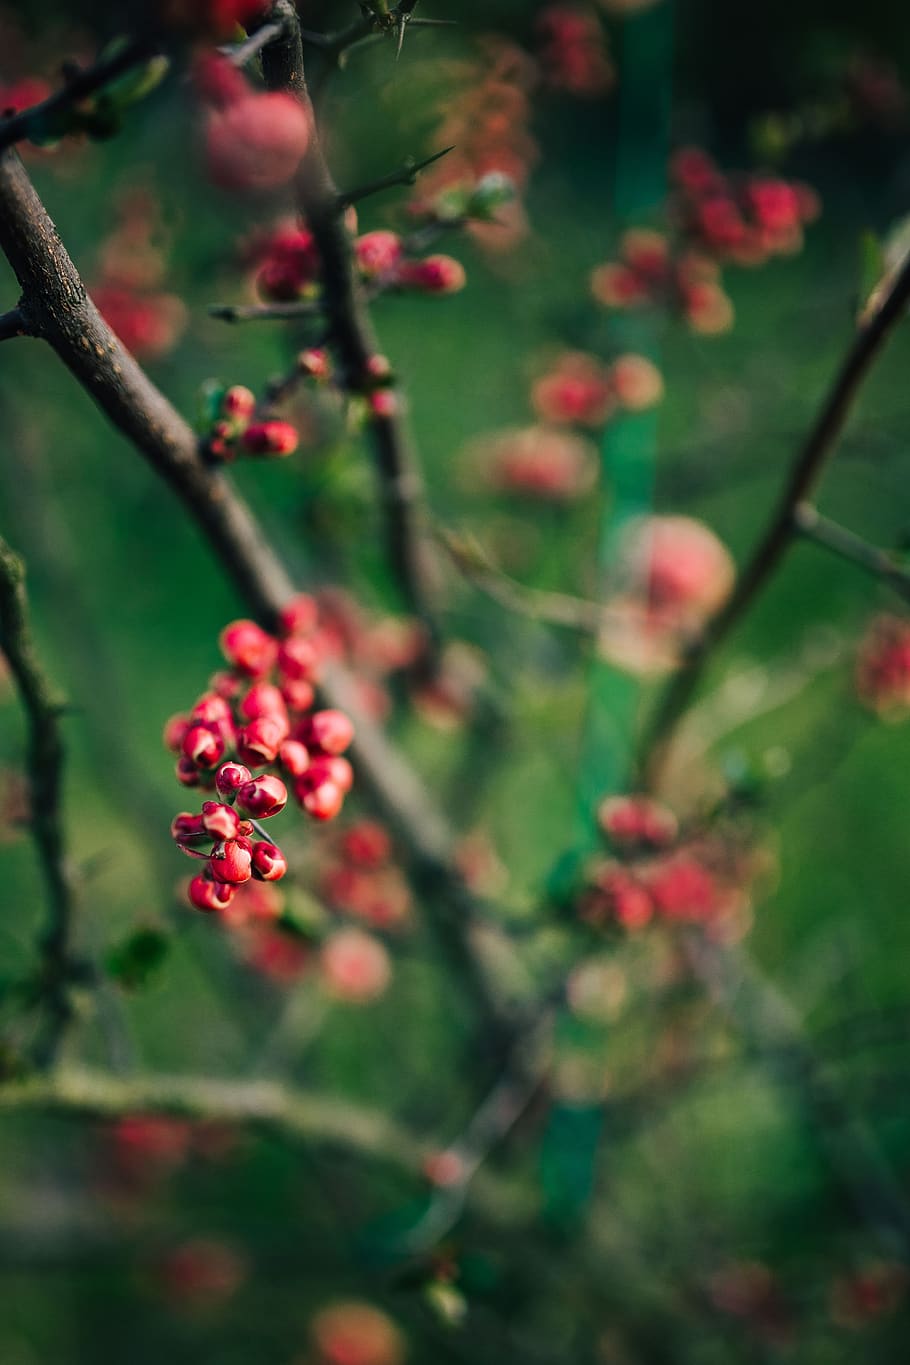 fruit, trees, rowan, branches, mountain ash, Red, growth, healthy eating, plant, food and drink